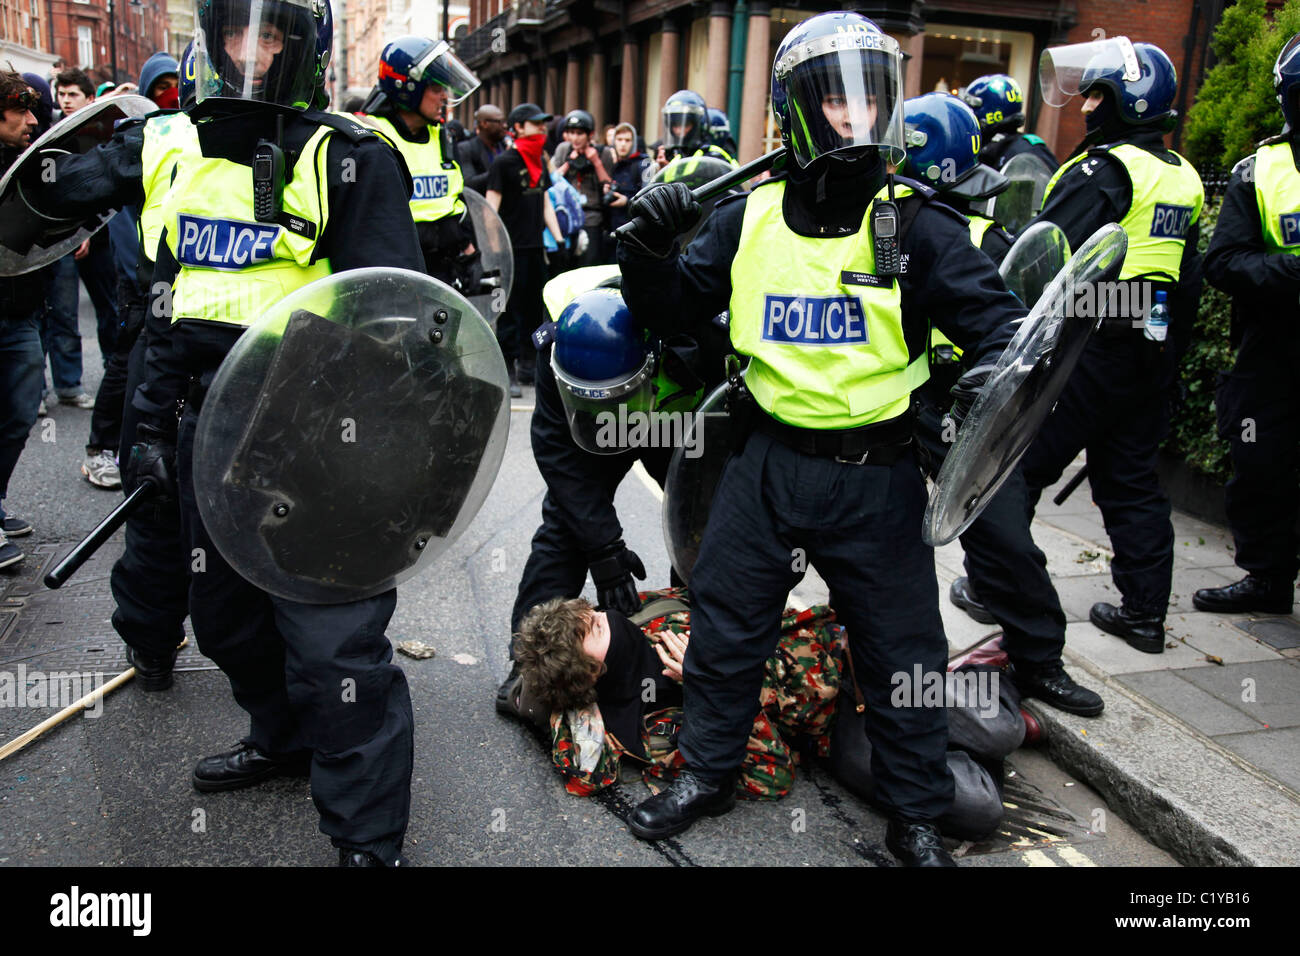 Anti capitalists / anarchists go on the rampage through central London on the back of the peaceful TUC protest march. Stock Photo